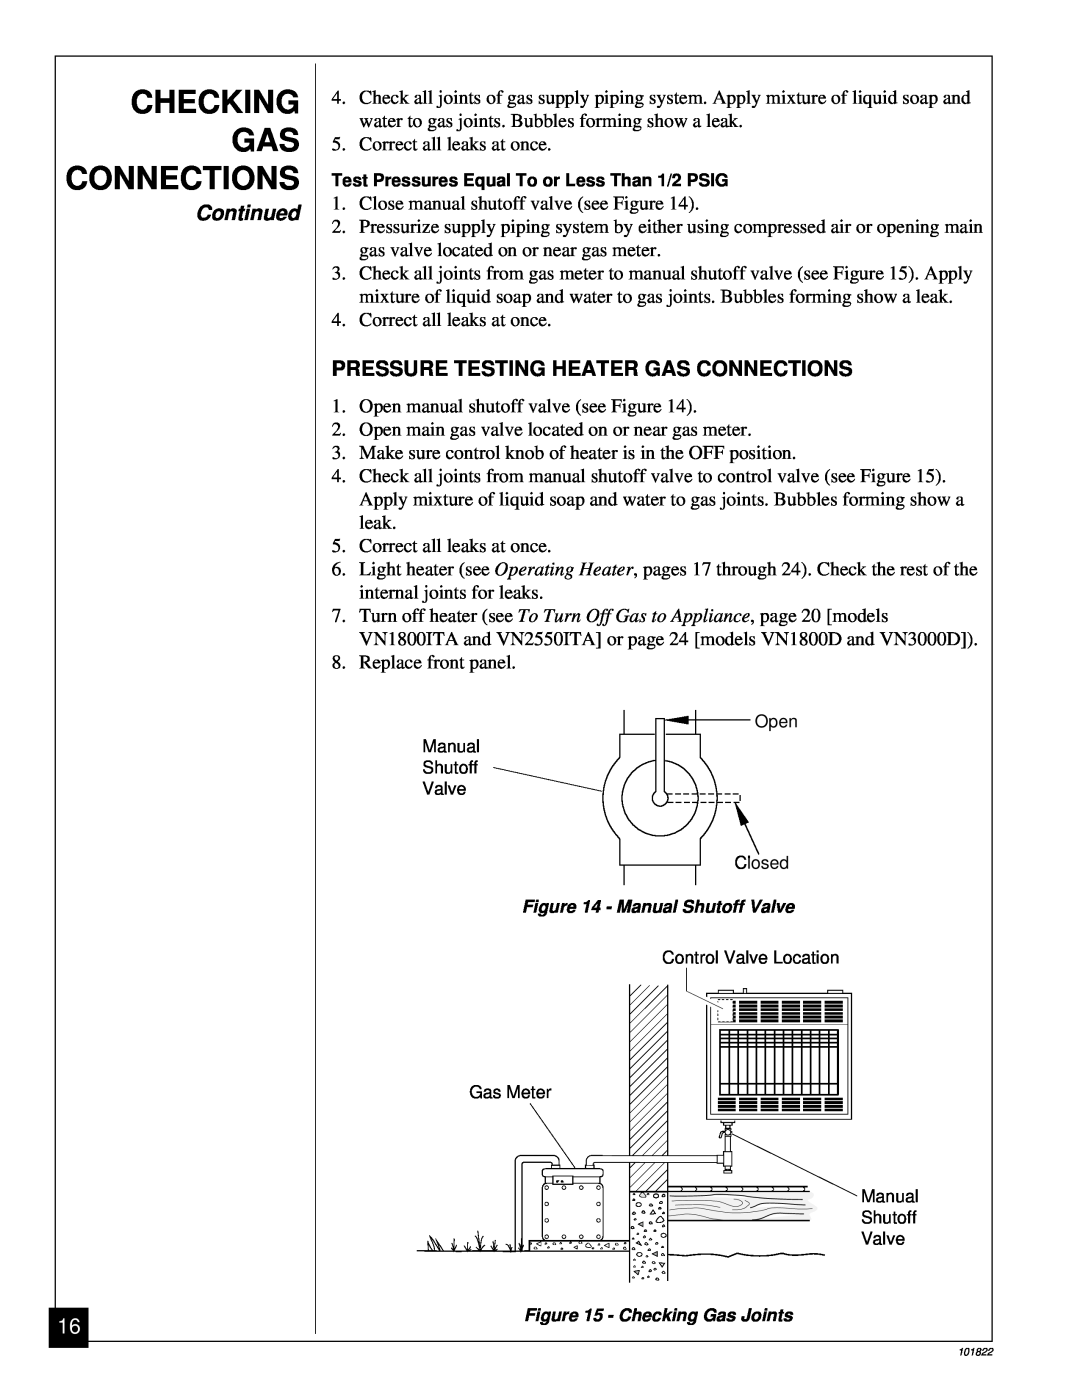 Desa VN1800ITA, VN1800D, VN2550ITA, VN3000D Checking Gas Connections, Continued, Pressure Testing Heater Gas Connections 